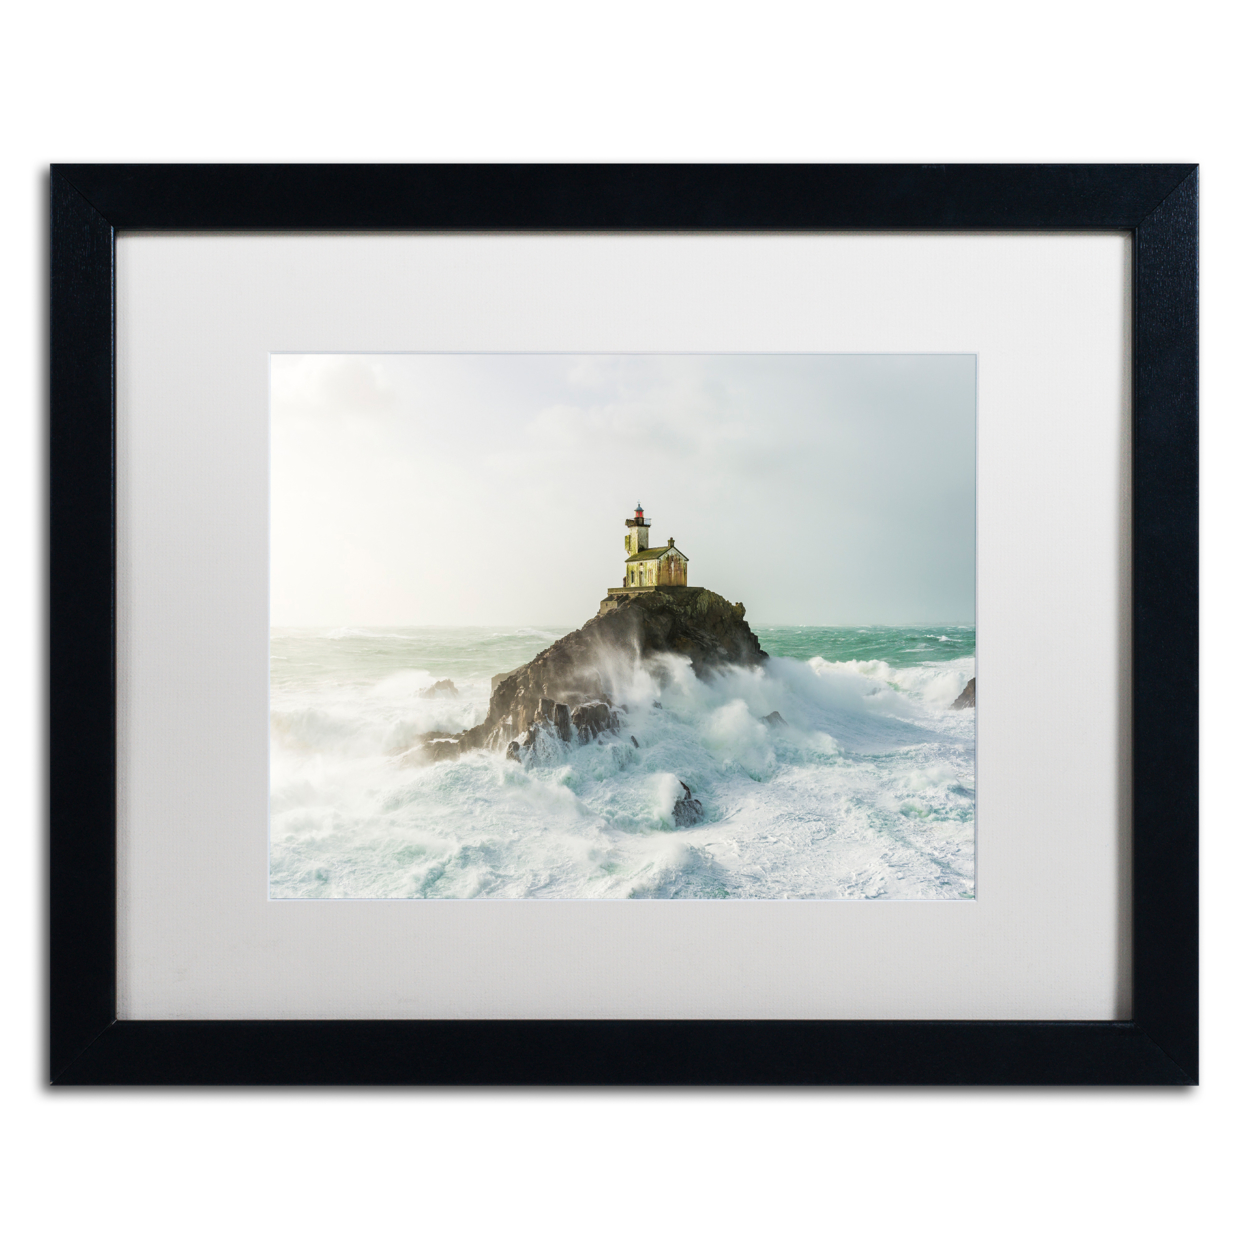 Mathieu Rivrin 'Haunted Lighthouse In The Storm' Black Wooden Framed Art 18 X 22 Inches